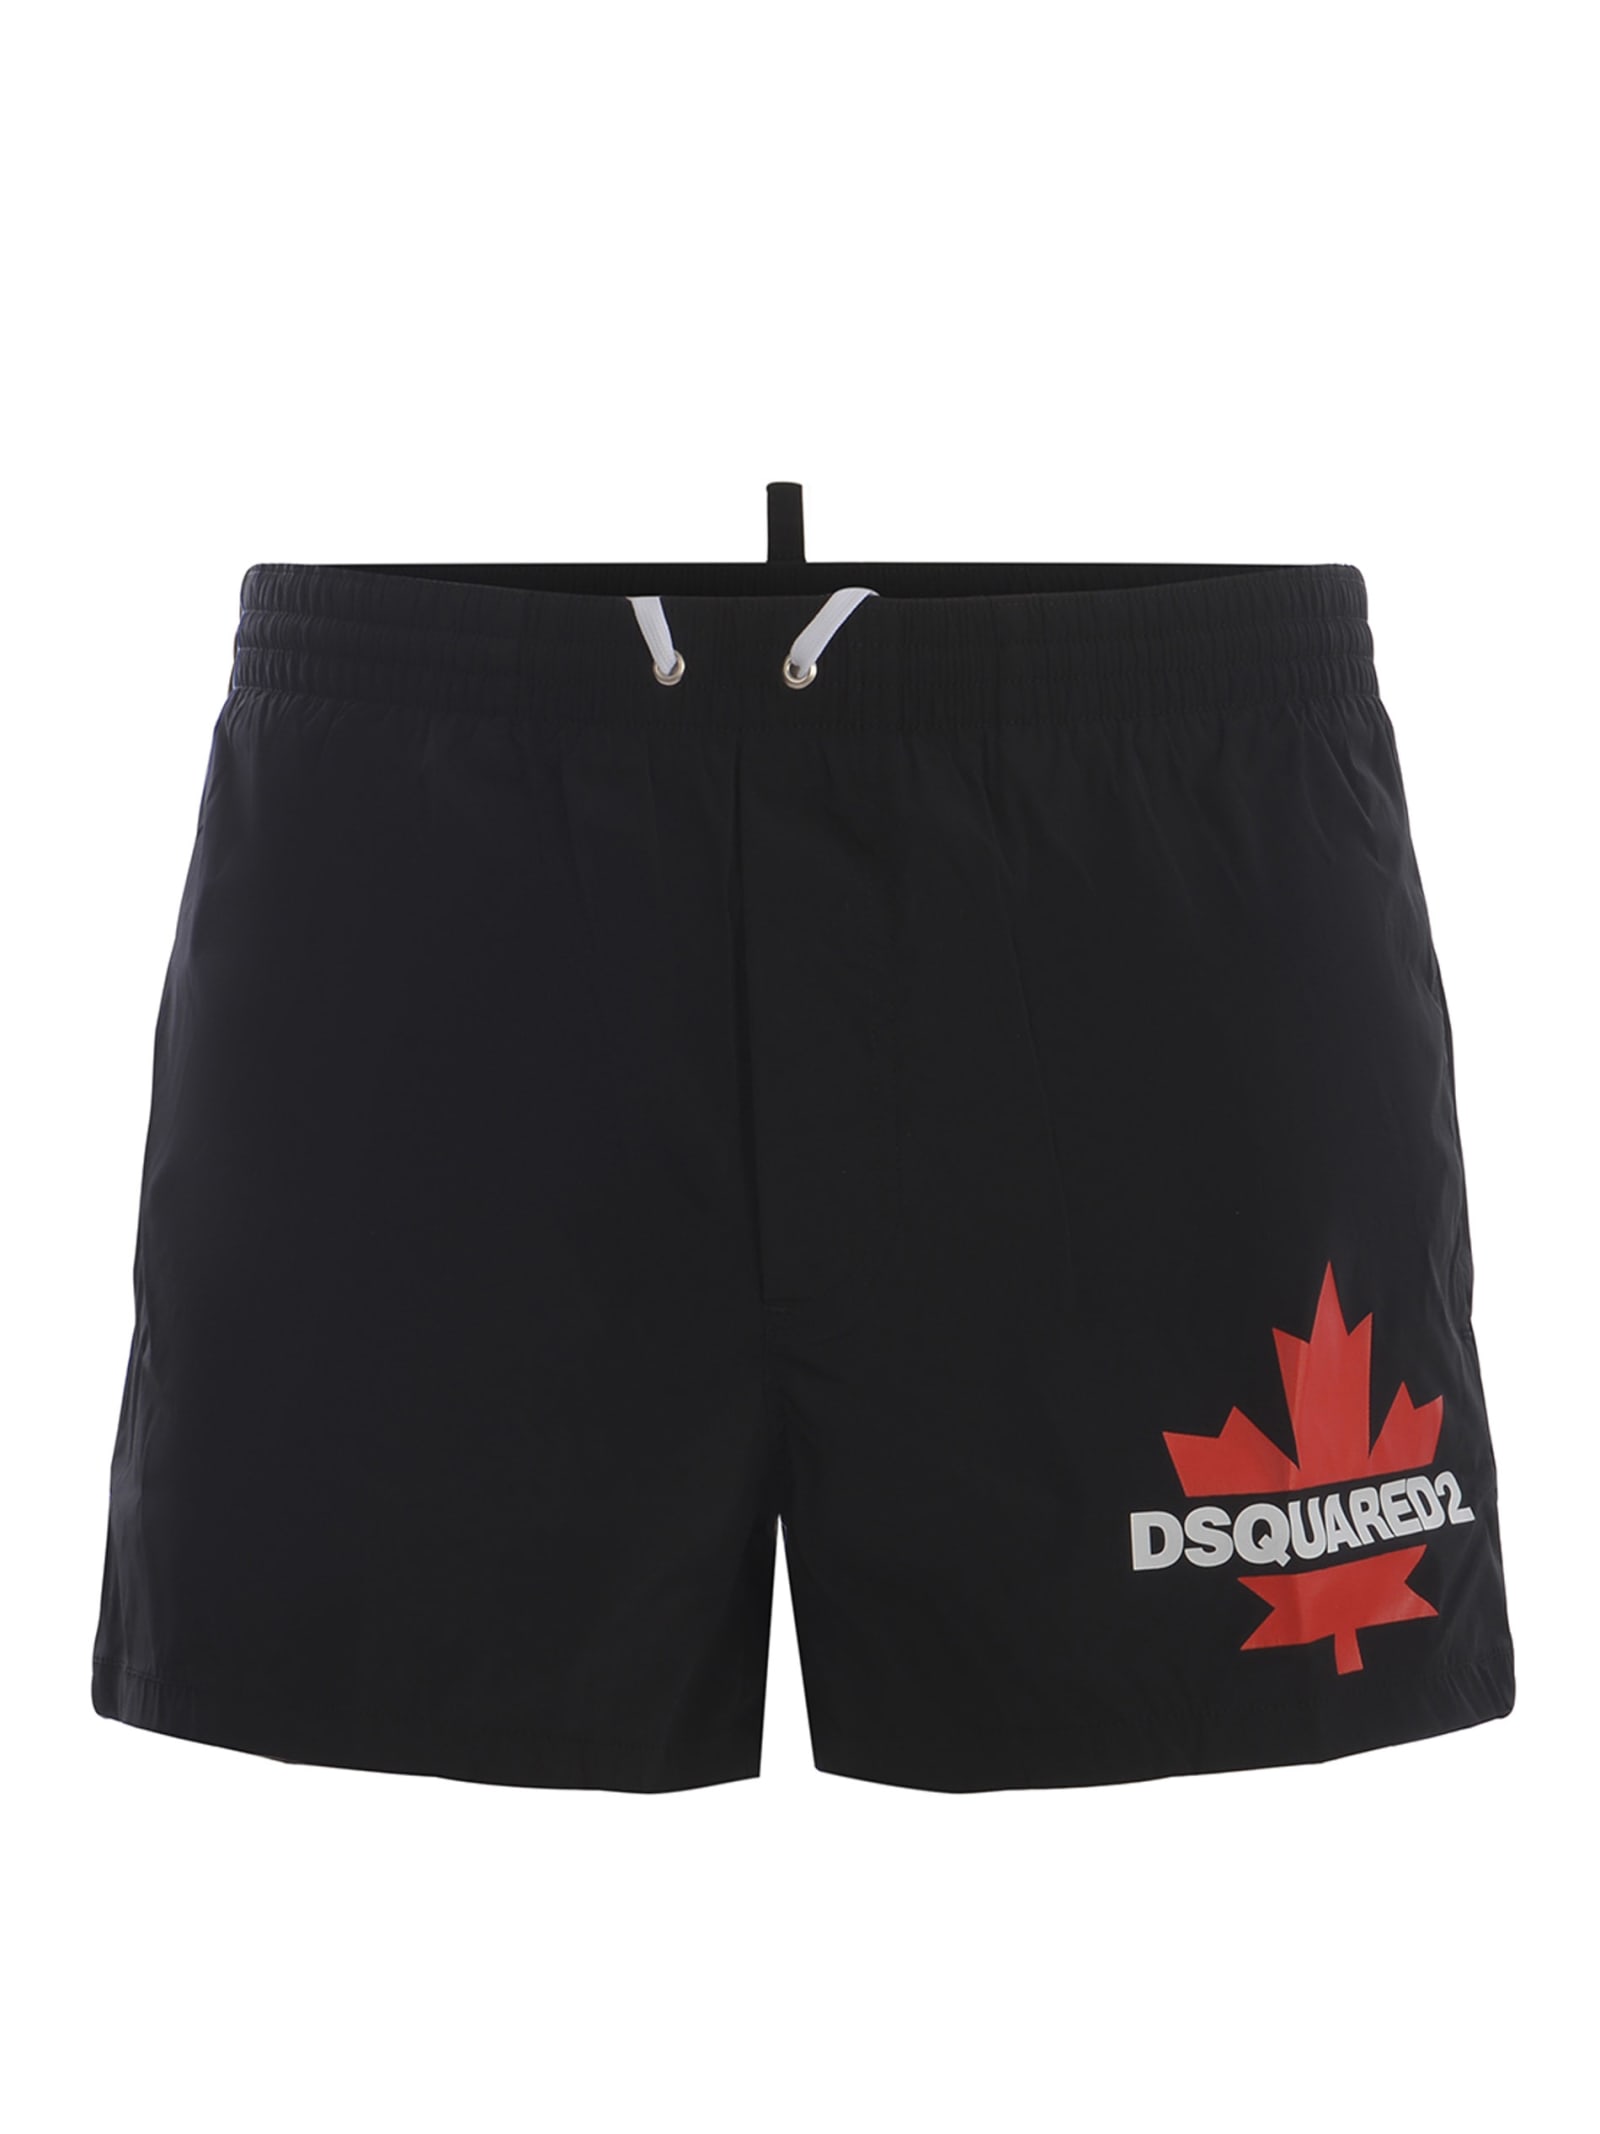 Swimsuit Dsquared2 Made Of Nylon